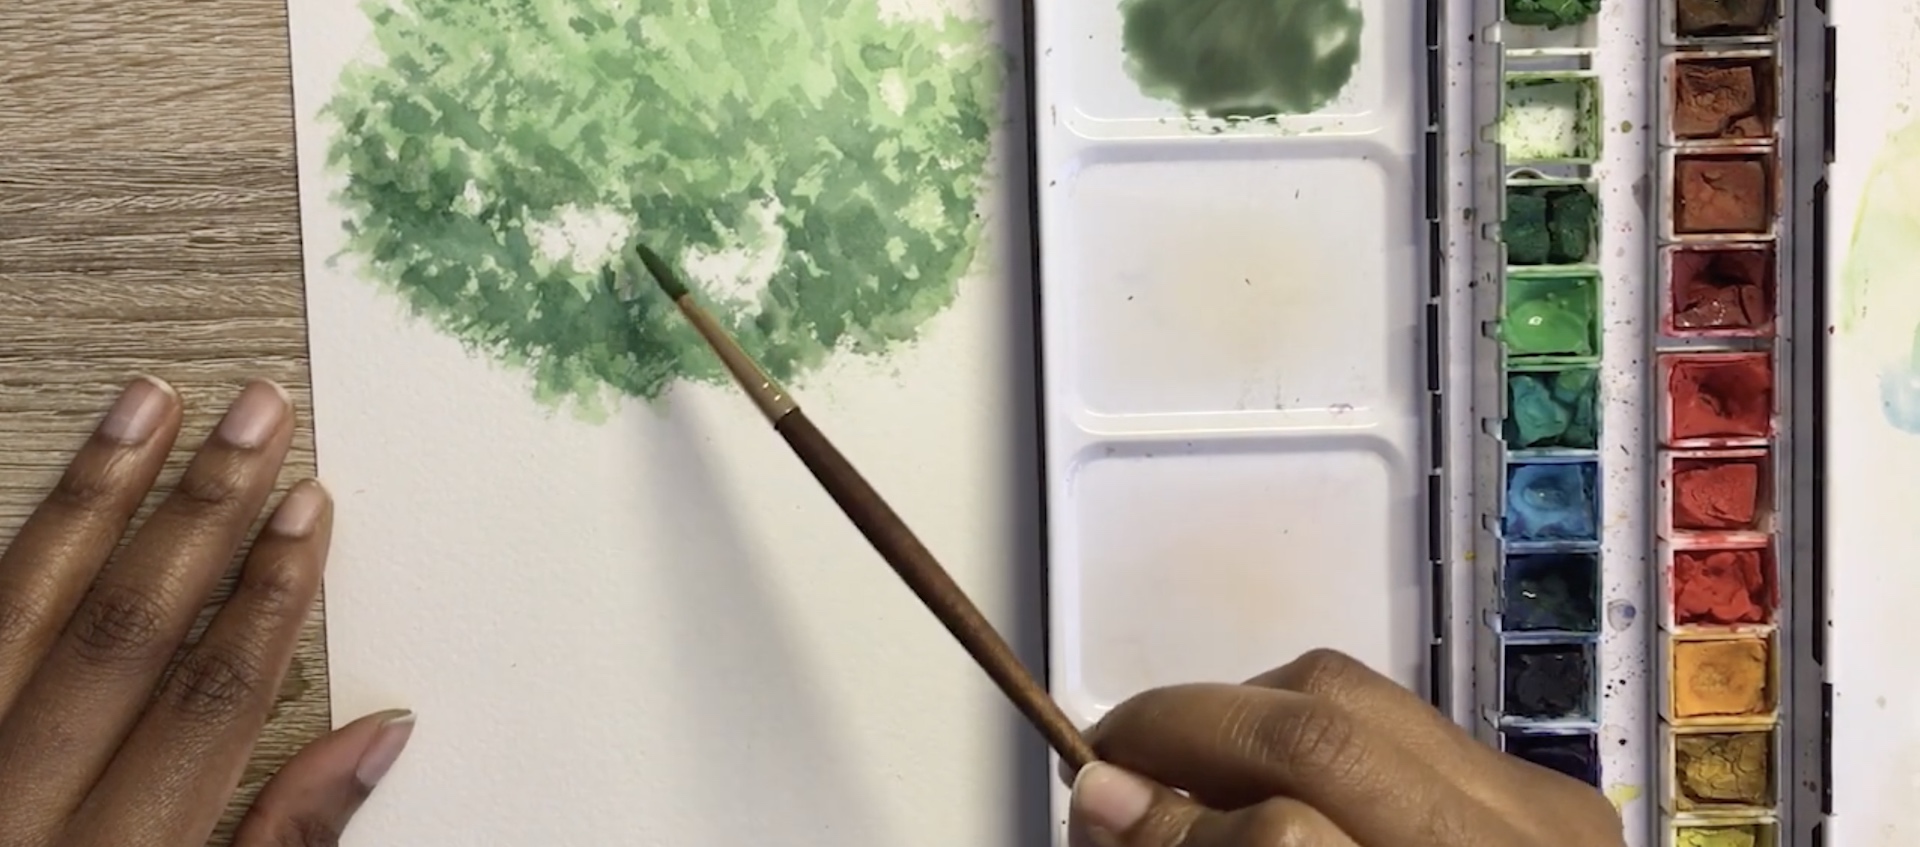 On a wood work surface with an open container of watercolor paints, a black woman's hands apply green paint to white paper, creating the look of a tree top